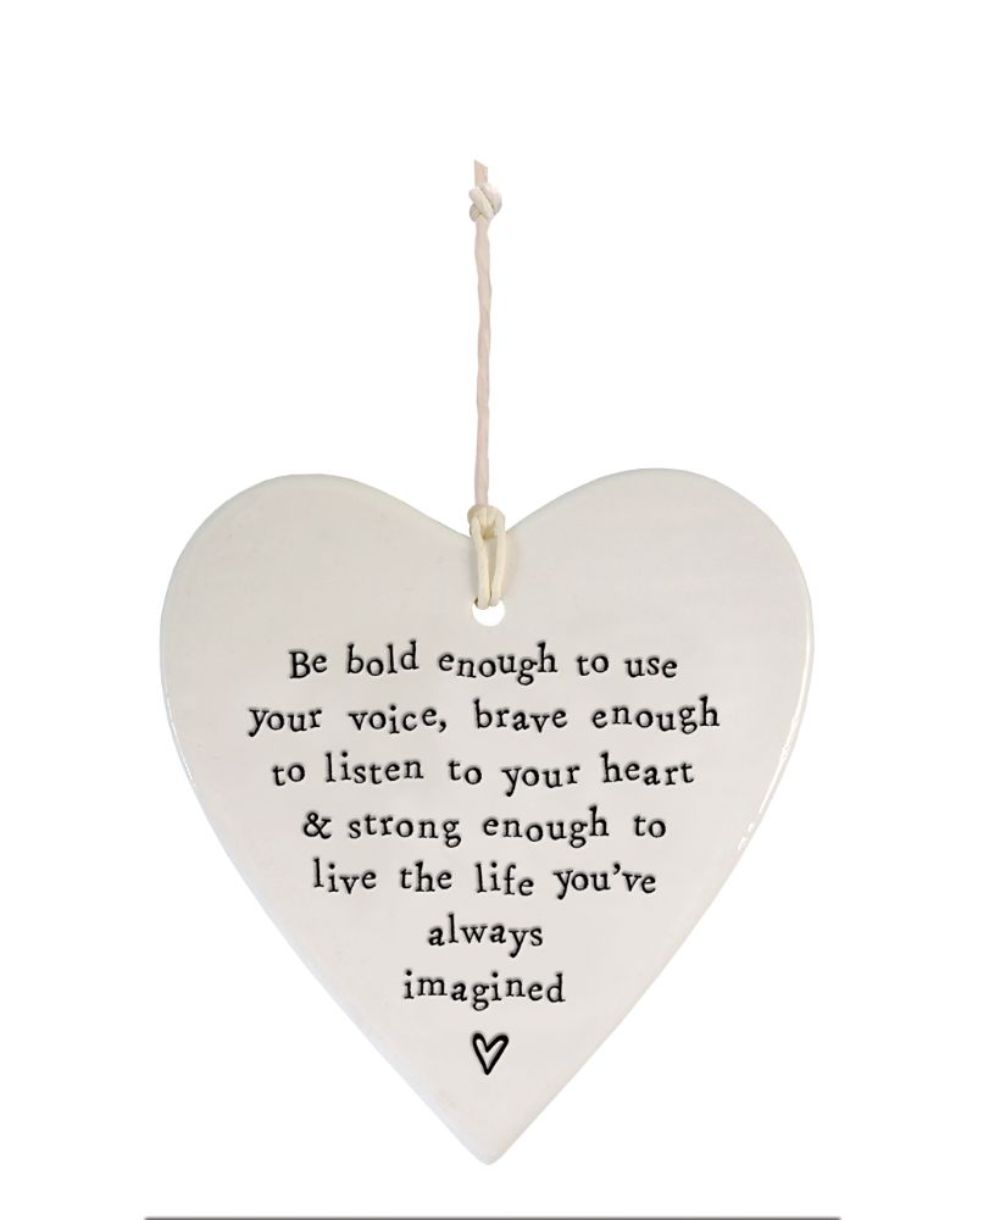 East Of India Live The Life You've Imagined Heart Shaped Ceramic Hanging Plaque